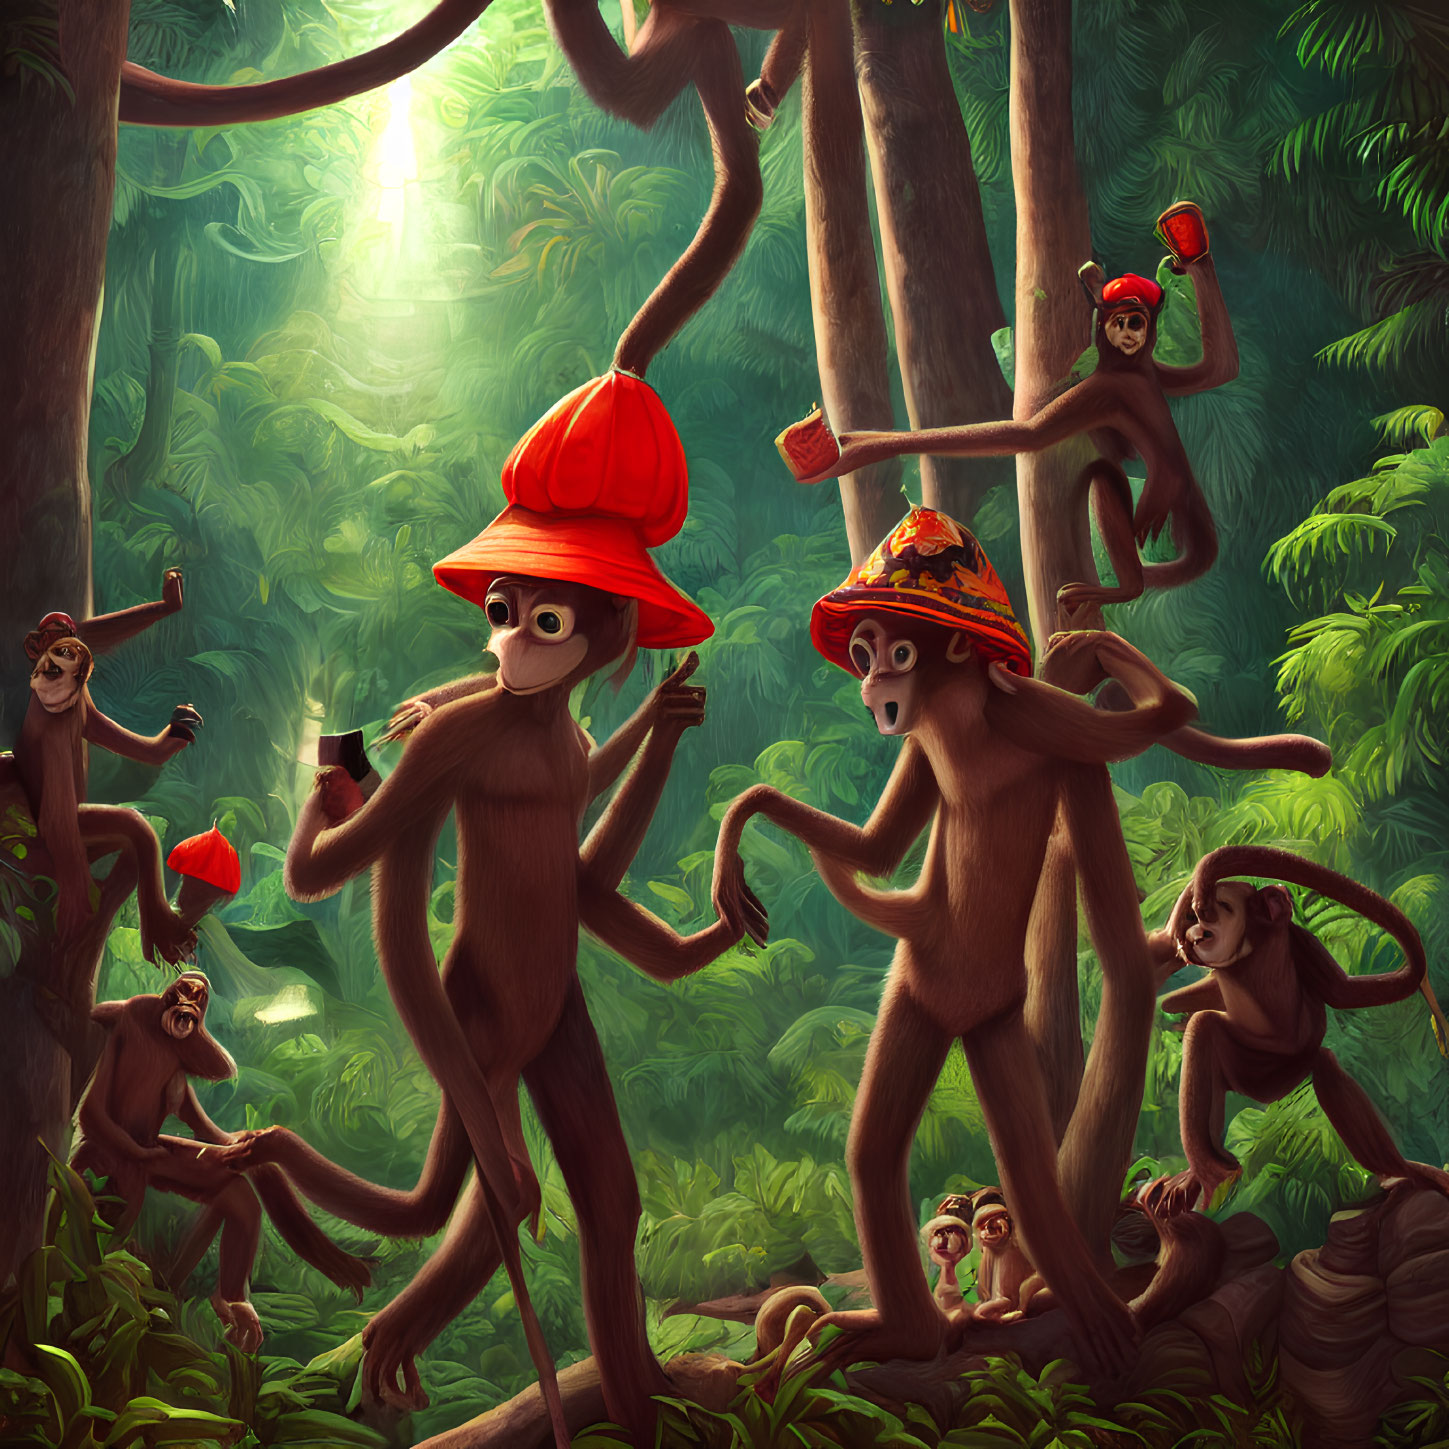 Animated monkeys in hats play in lush jungle setting